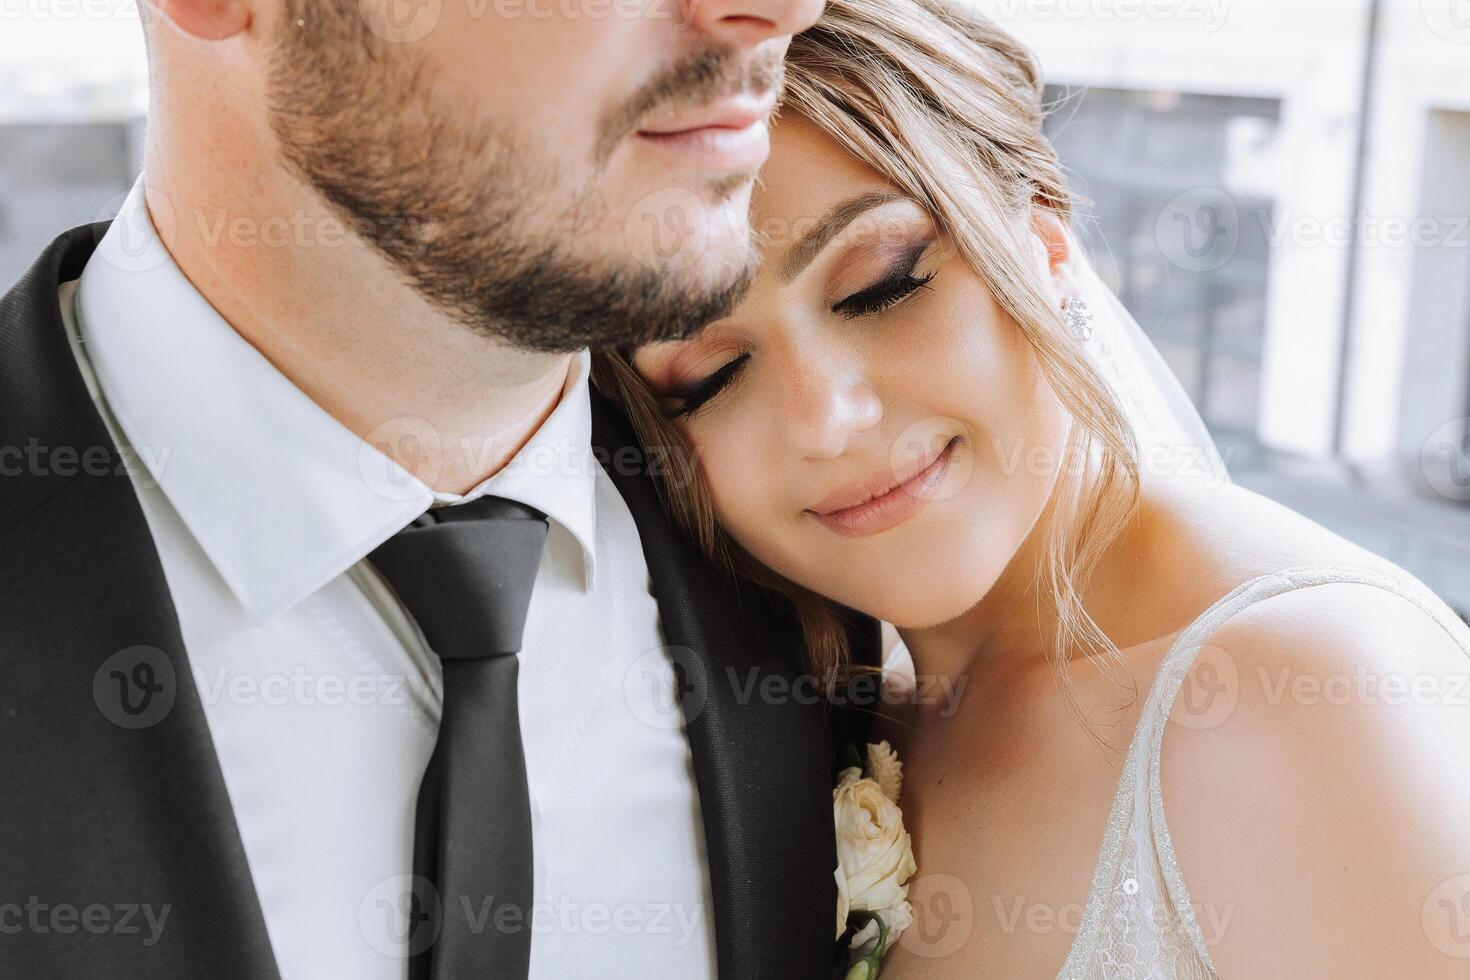 The bride and groom embrace. The bride gently hugs the groom by the shoulders. Beautiful wedding couple. The concept of romance in a newlyweds relationship. Honeymoon. photo